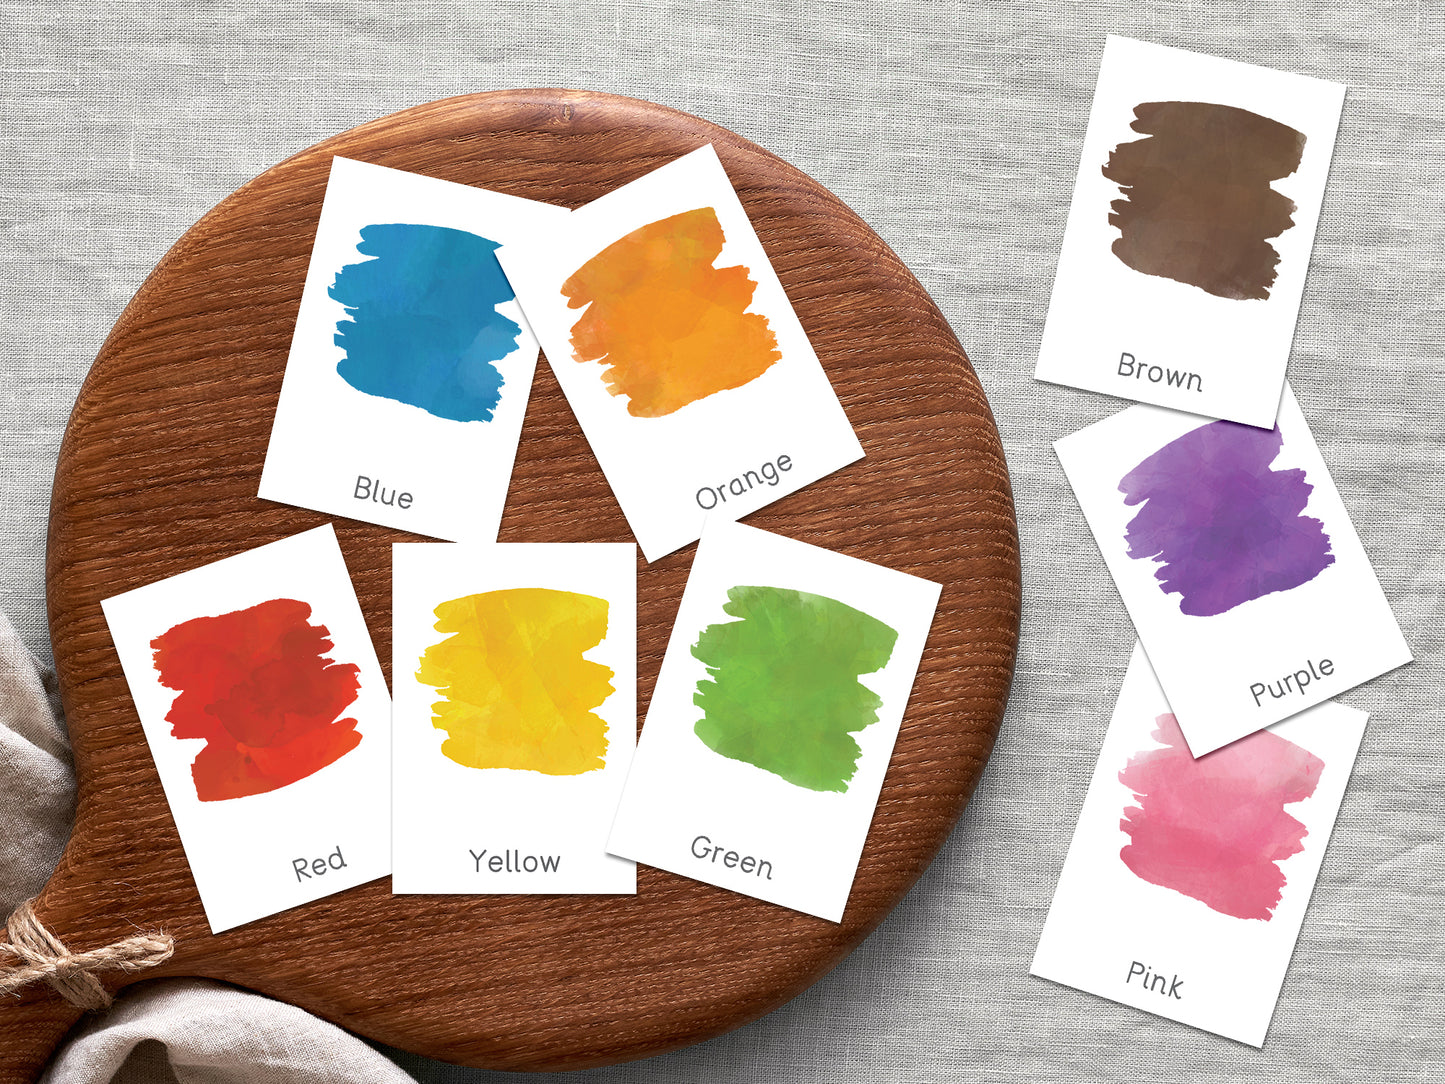 Color flashcards